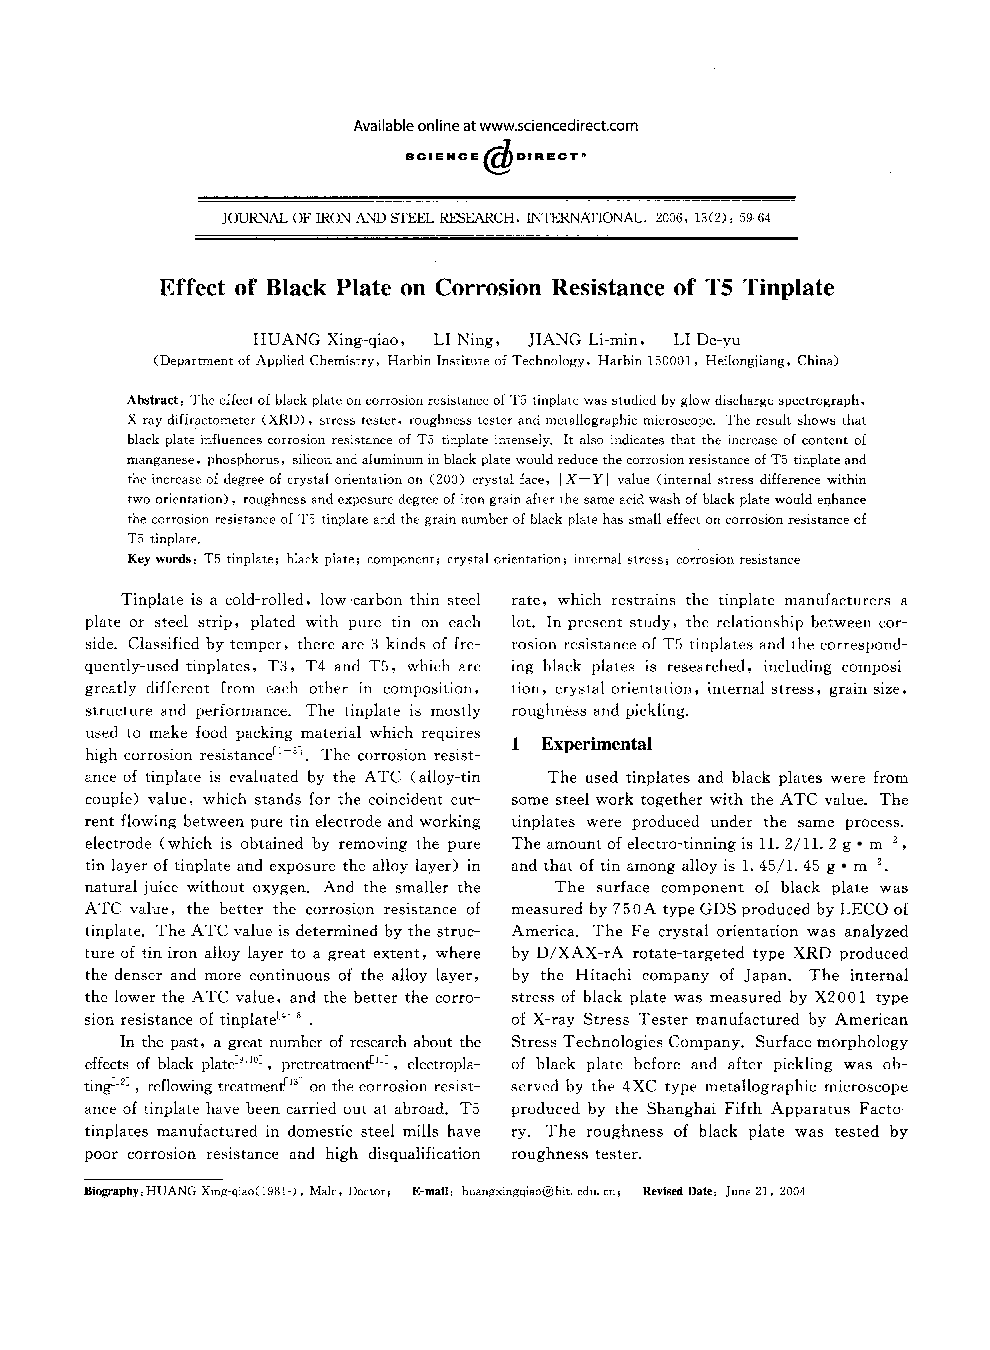 Effect of Black Plate on Corrosion Resistance of T5 Tinplate